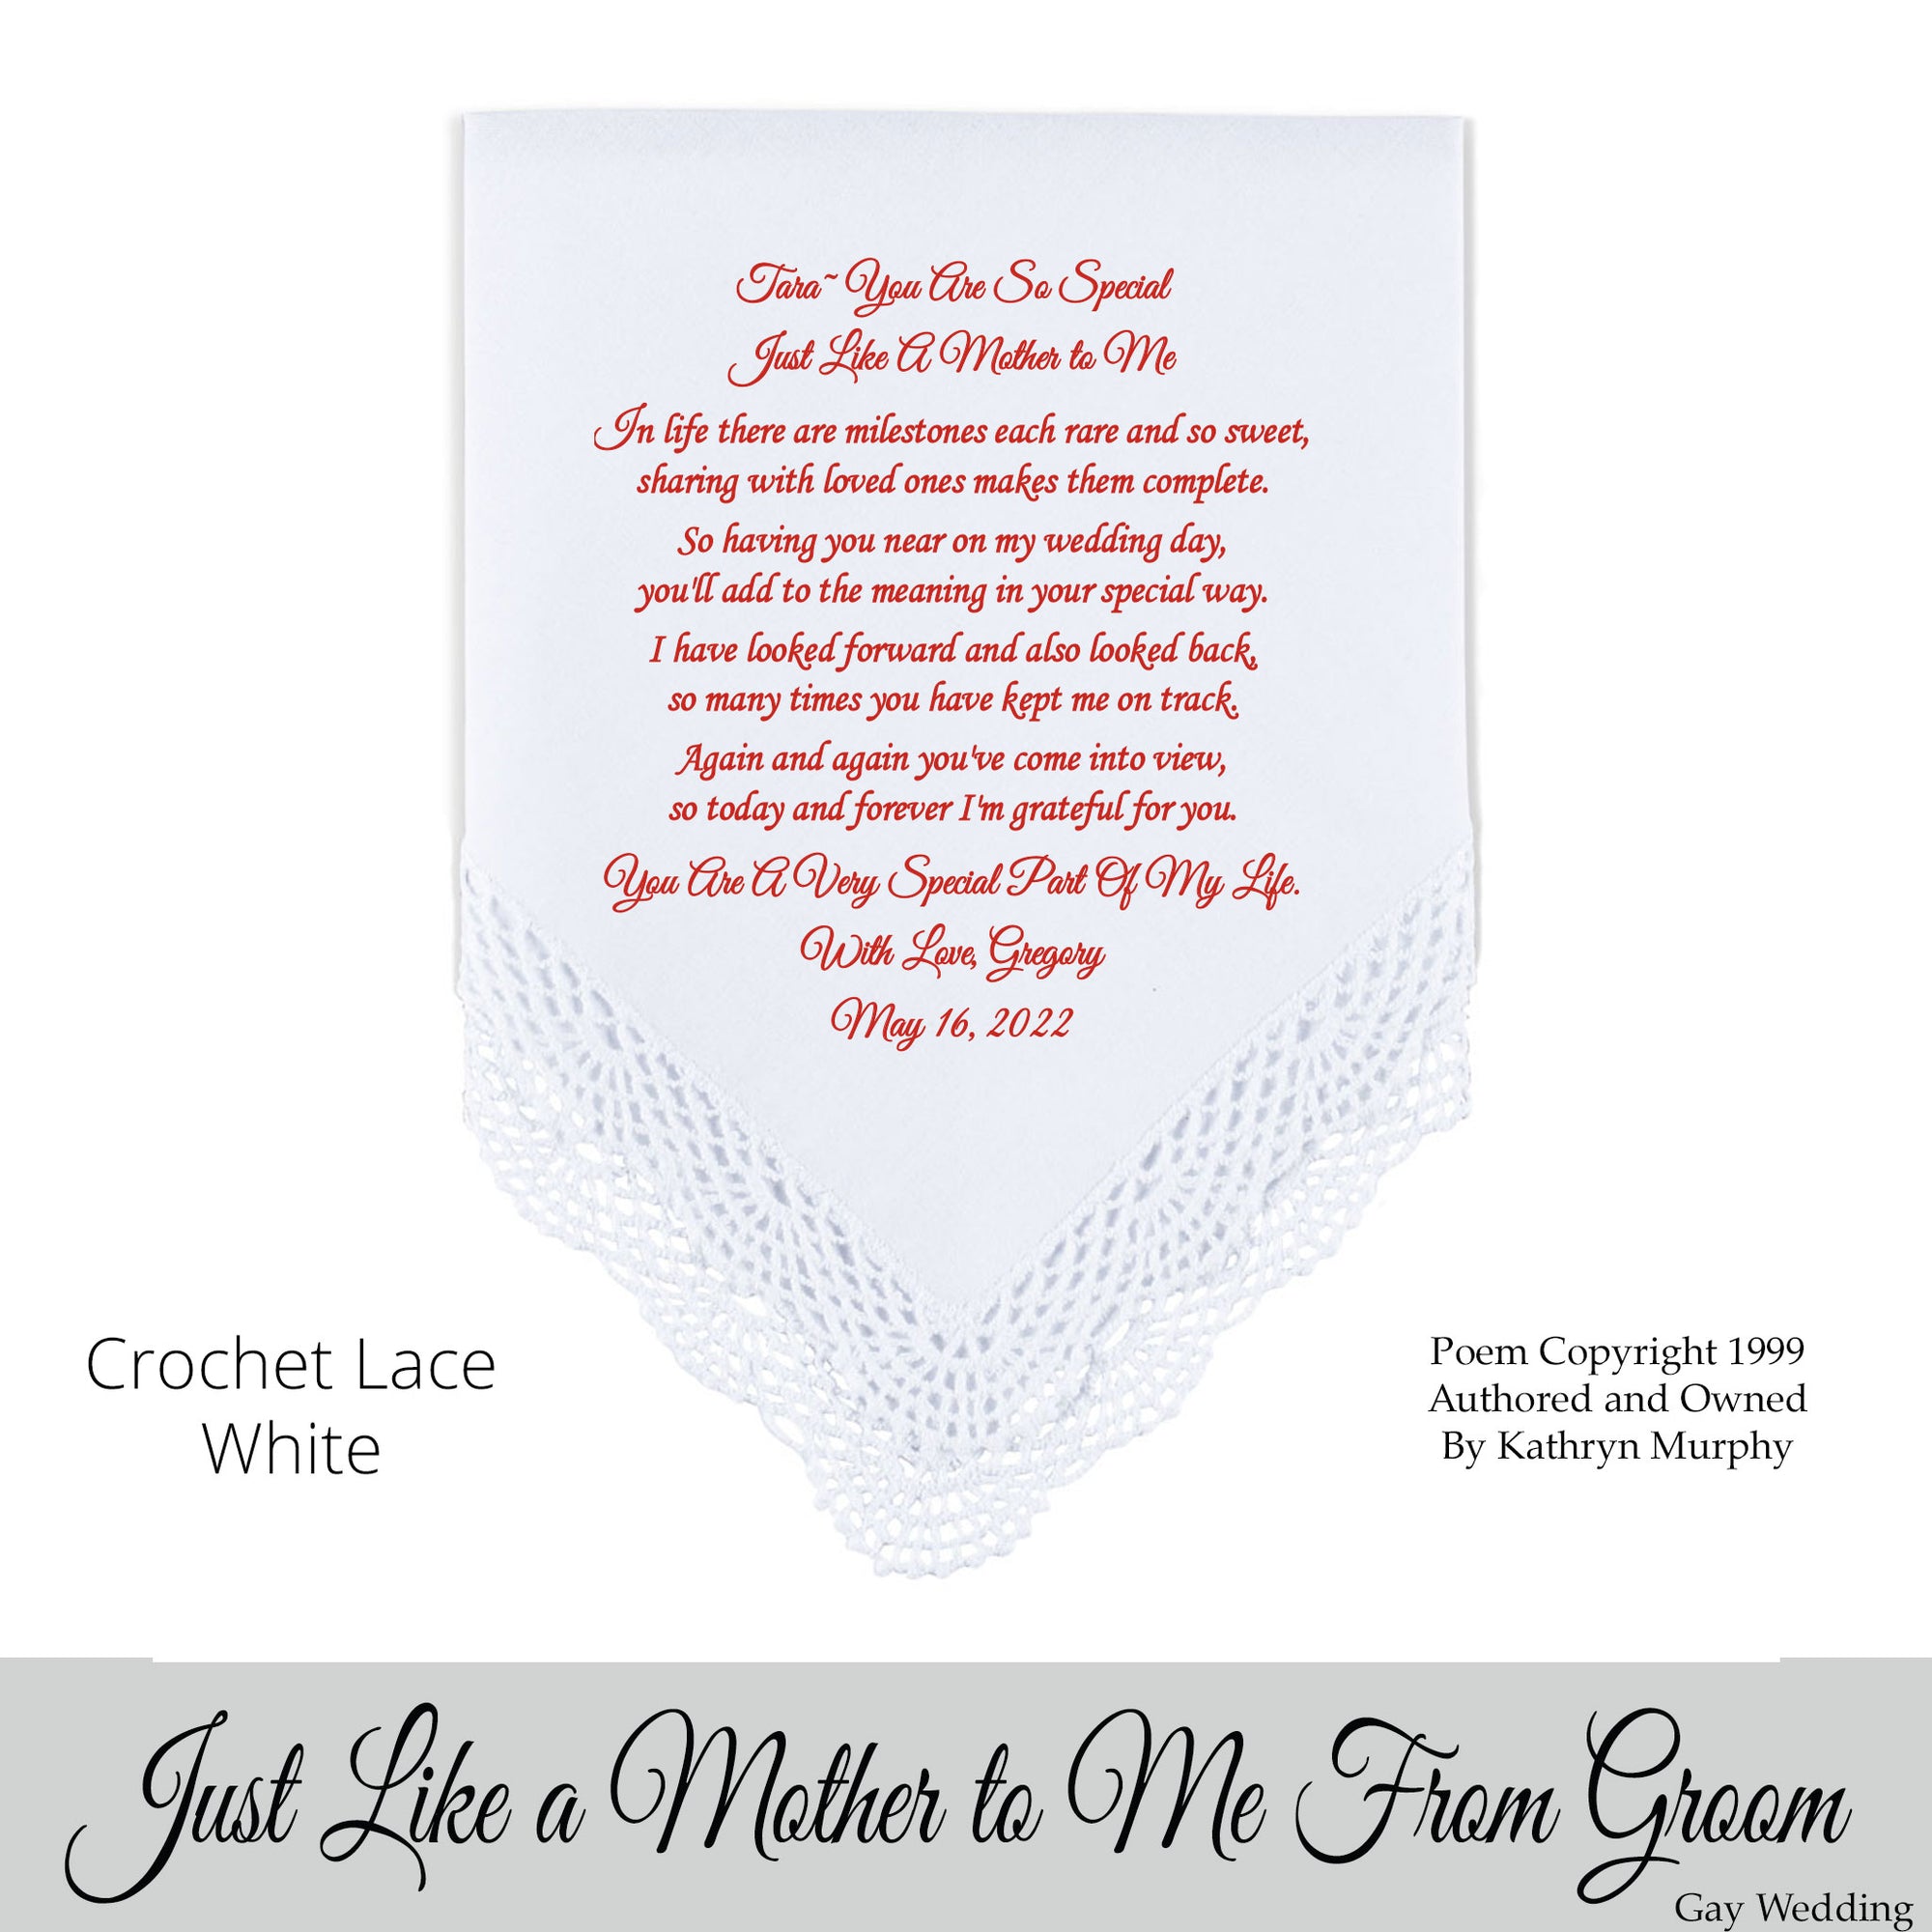 Gay Wedding Gift for the someone like a mother of the groom poem printed wedding hankie